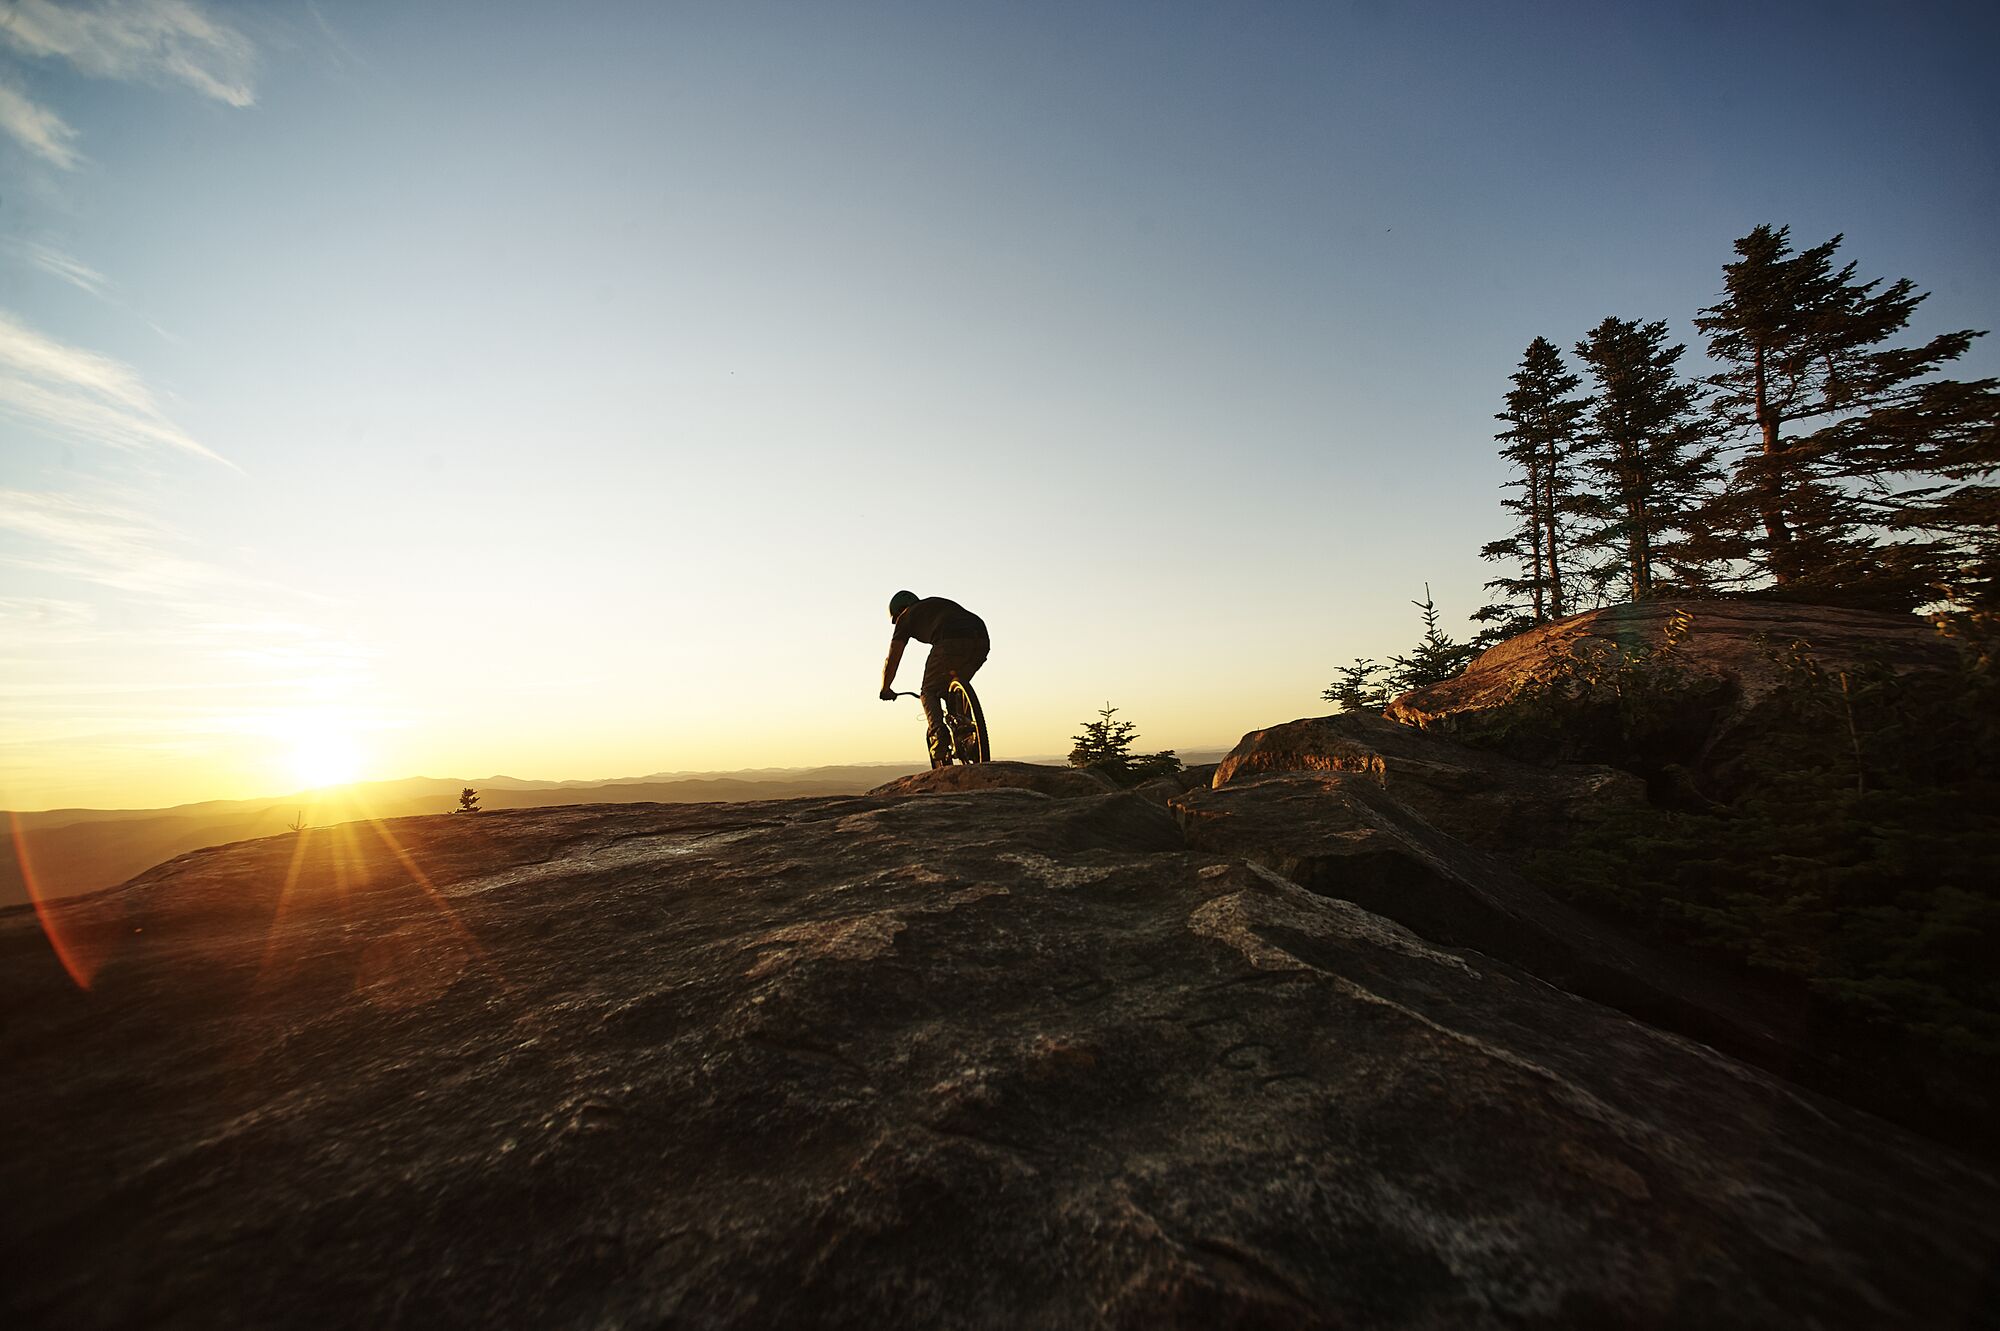 A person rides a bike on the rocky peak of a mountain with the sun setting in the background.